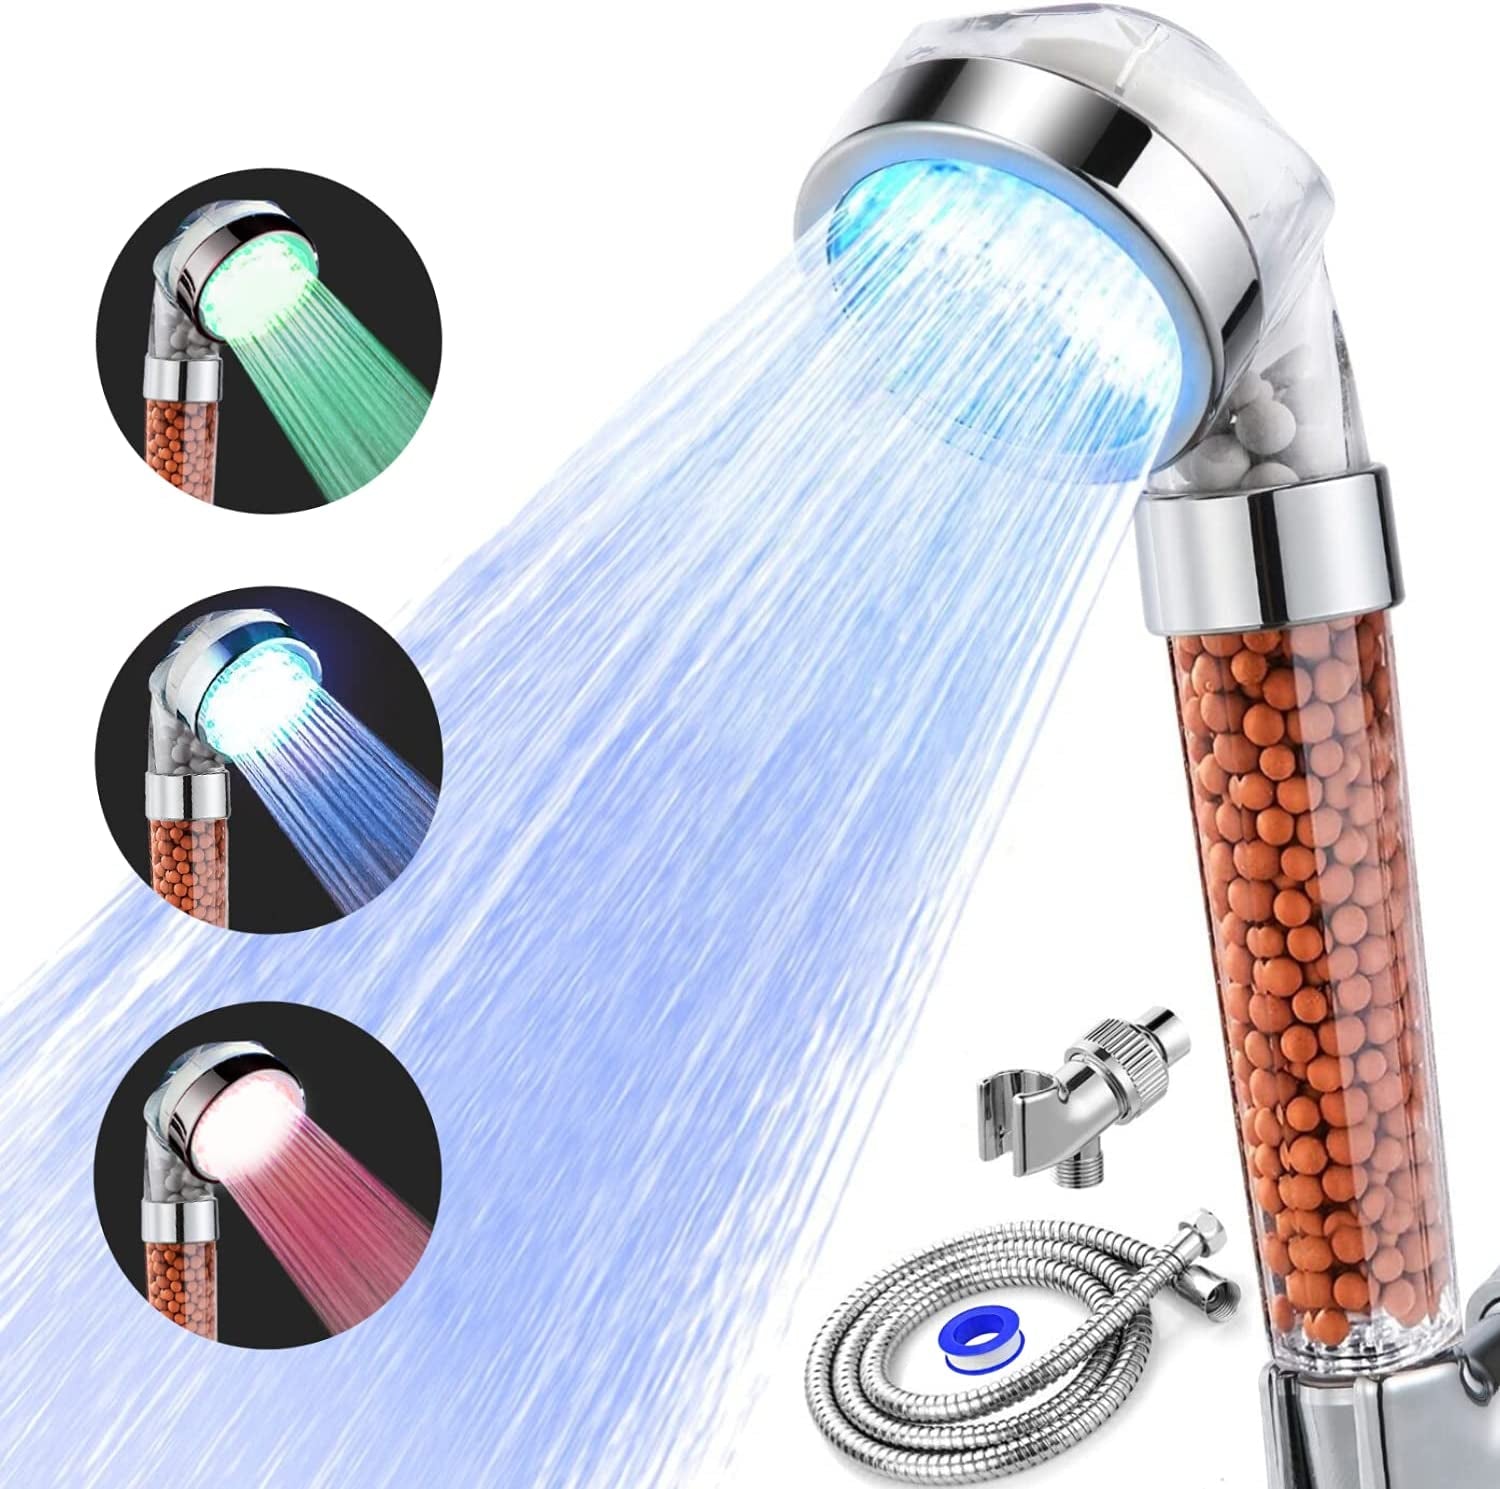 LED Shower Heads with 3 Color Changing - Filtered Shower Head with Temperature Controlled, High Pressure Shower Heads with Hose and Bracket